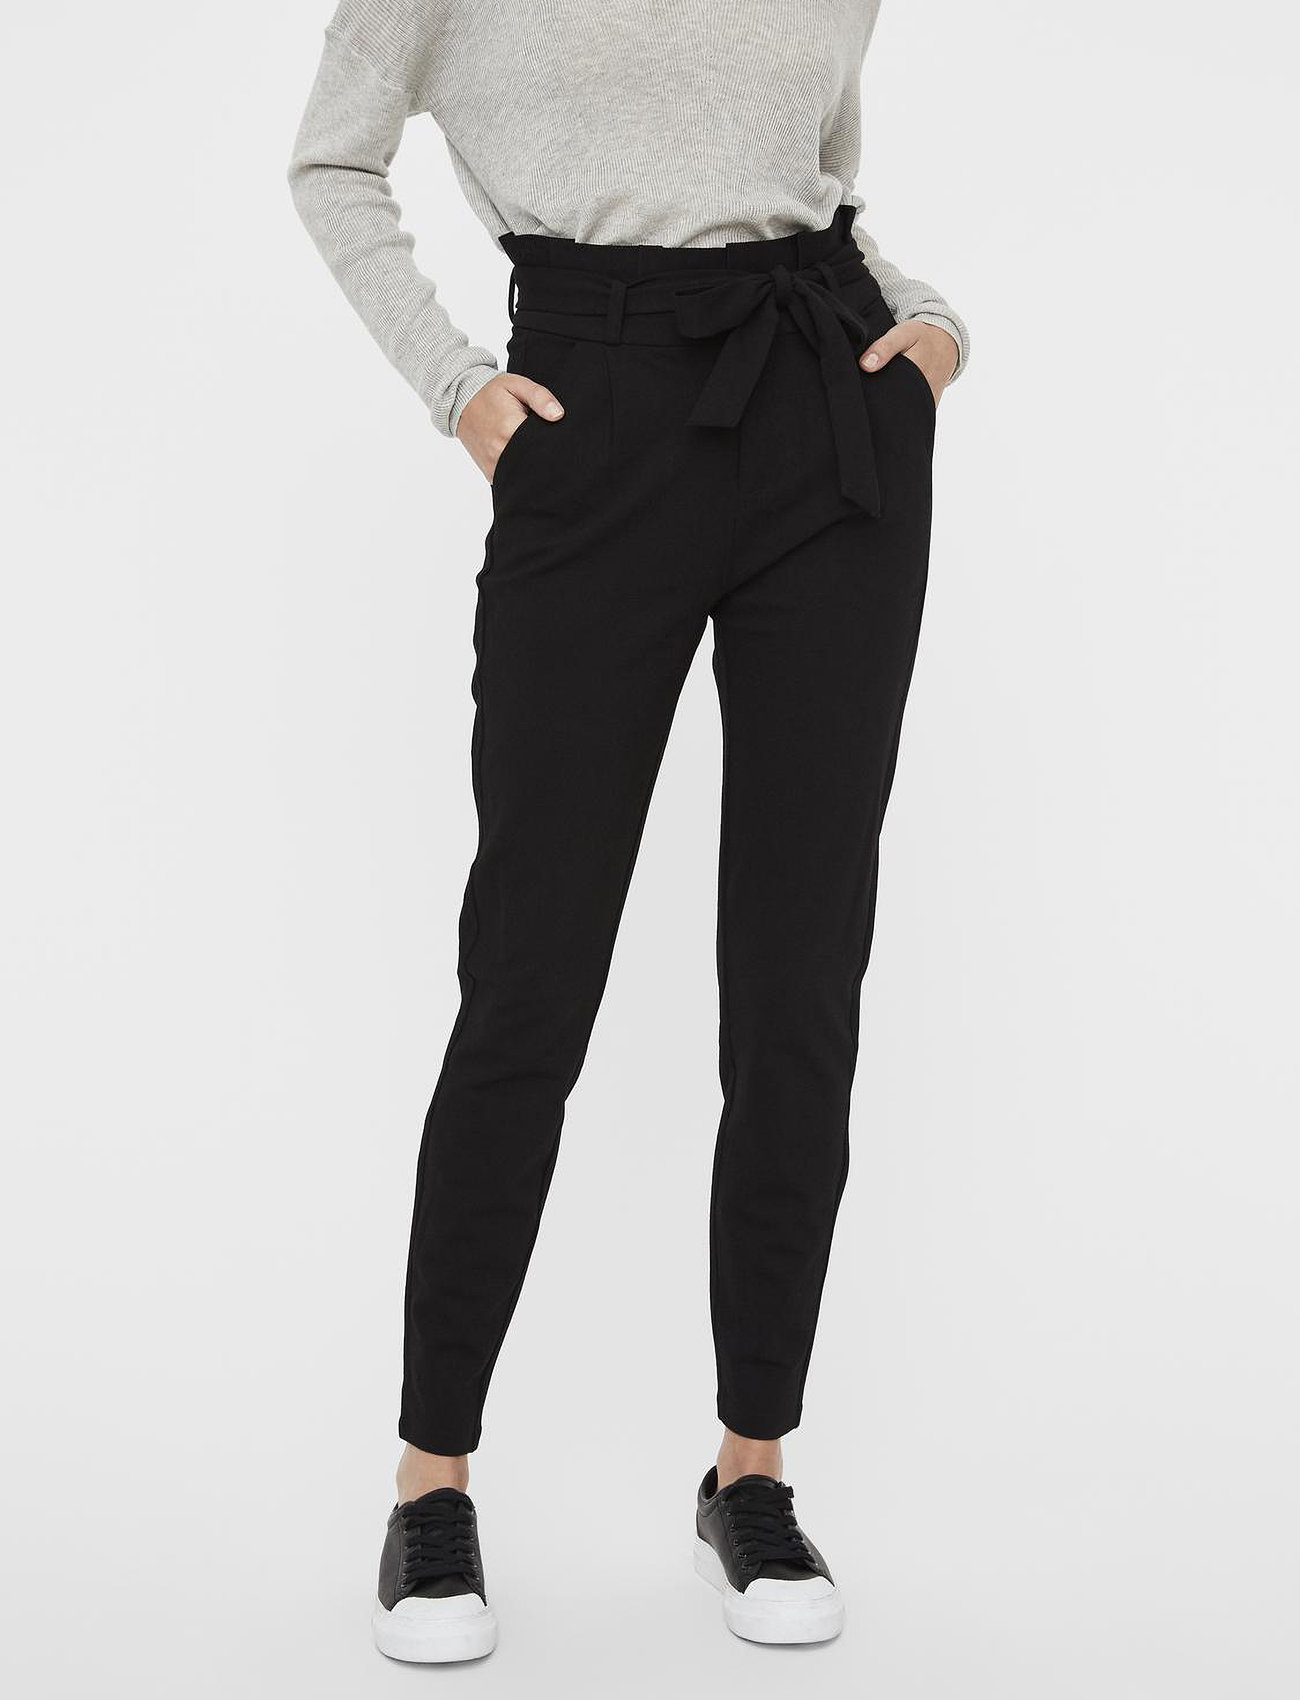 New Look high waist paperbag trousers in black  ASOS